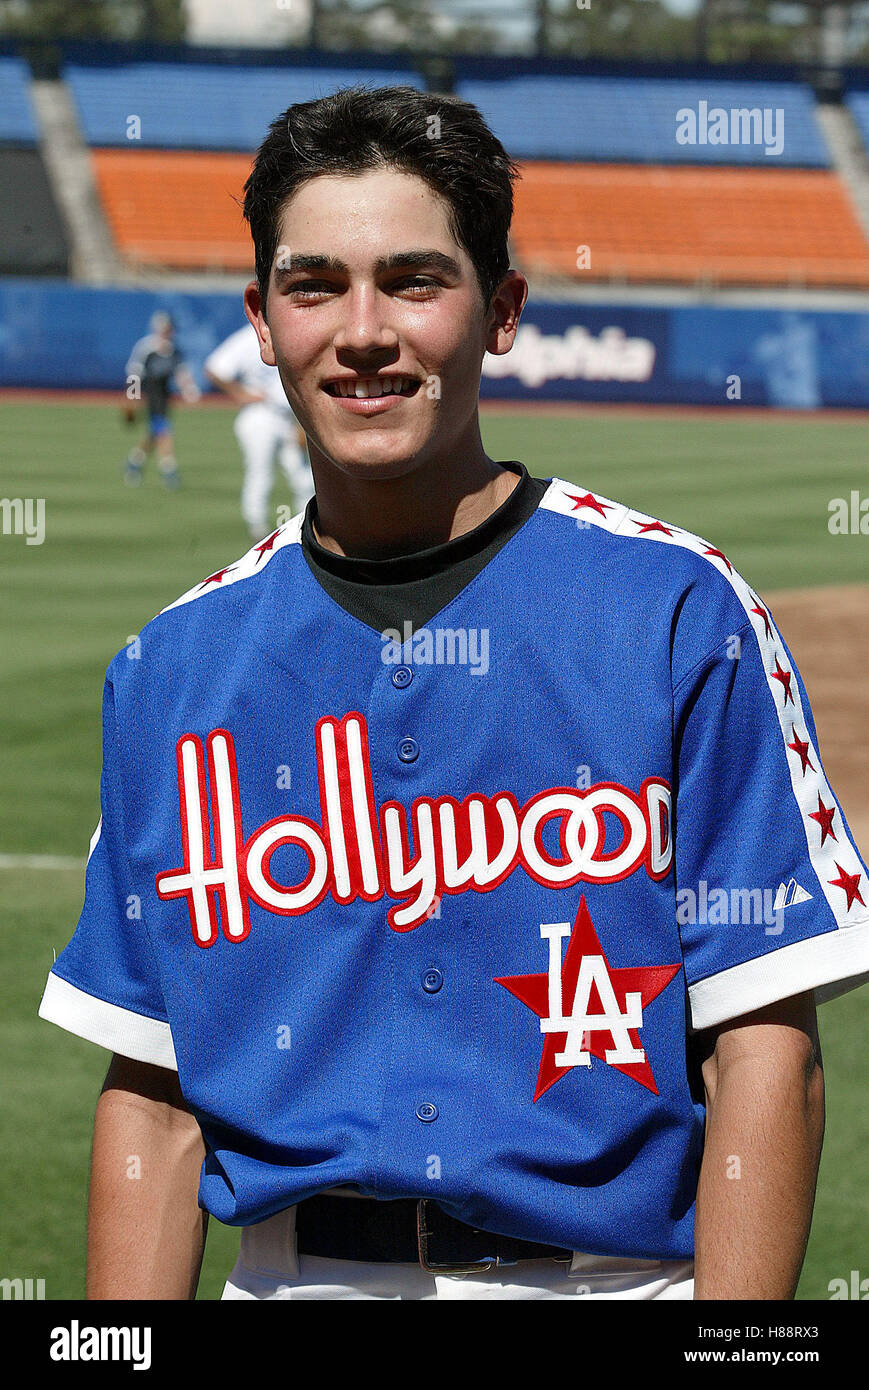 dodgers hollywood stars jersey